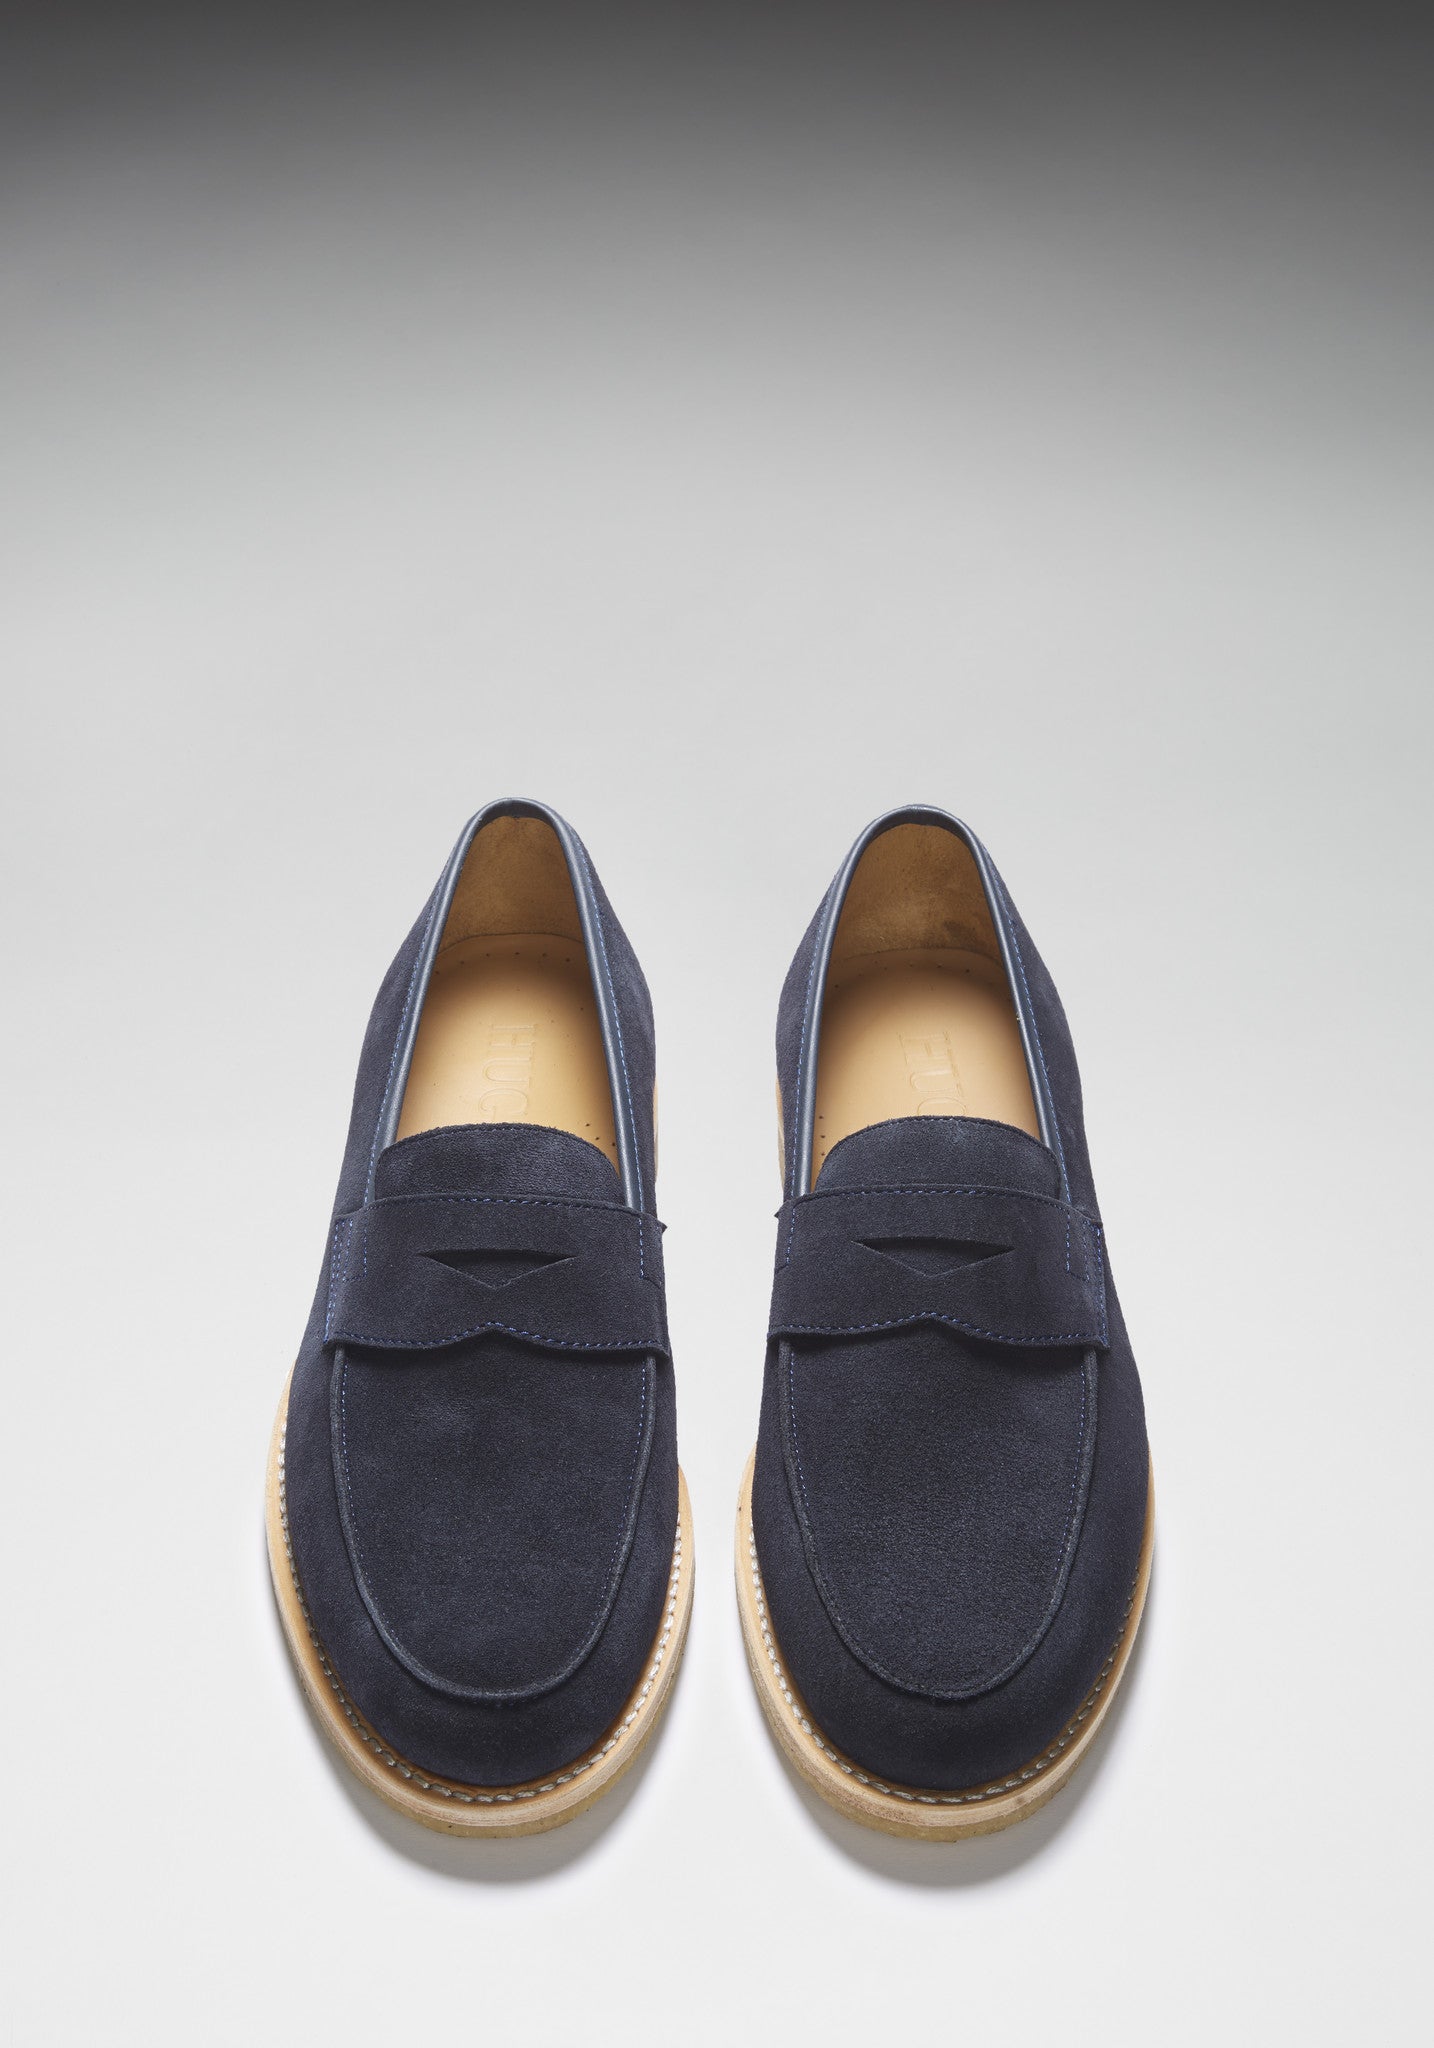 Blue Loafers, Crepe Rubber Sole Hugs & Co.